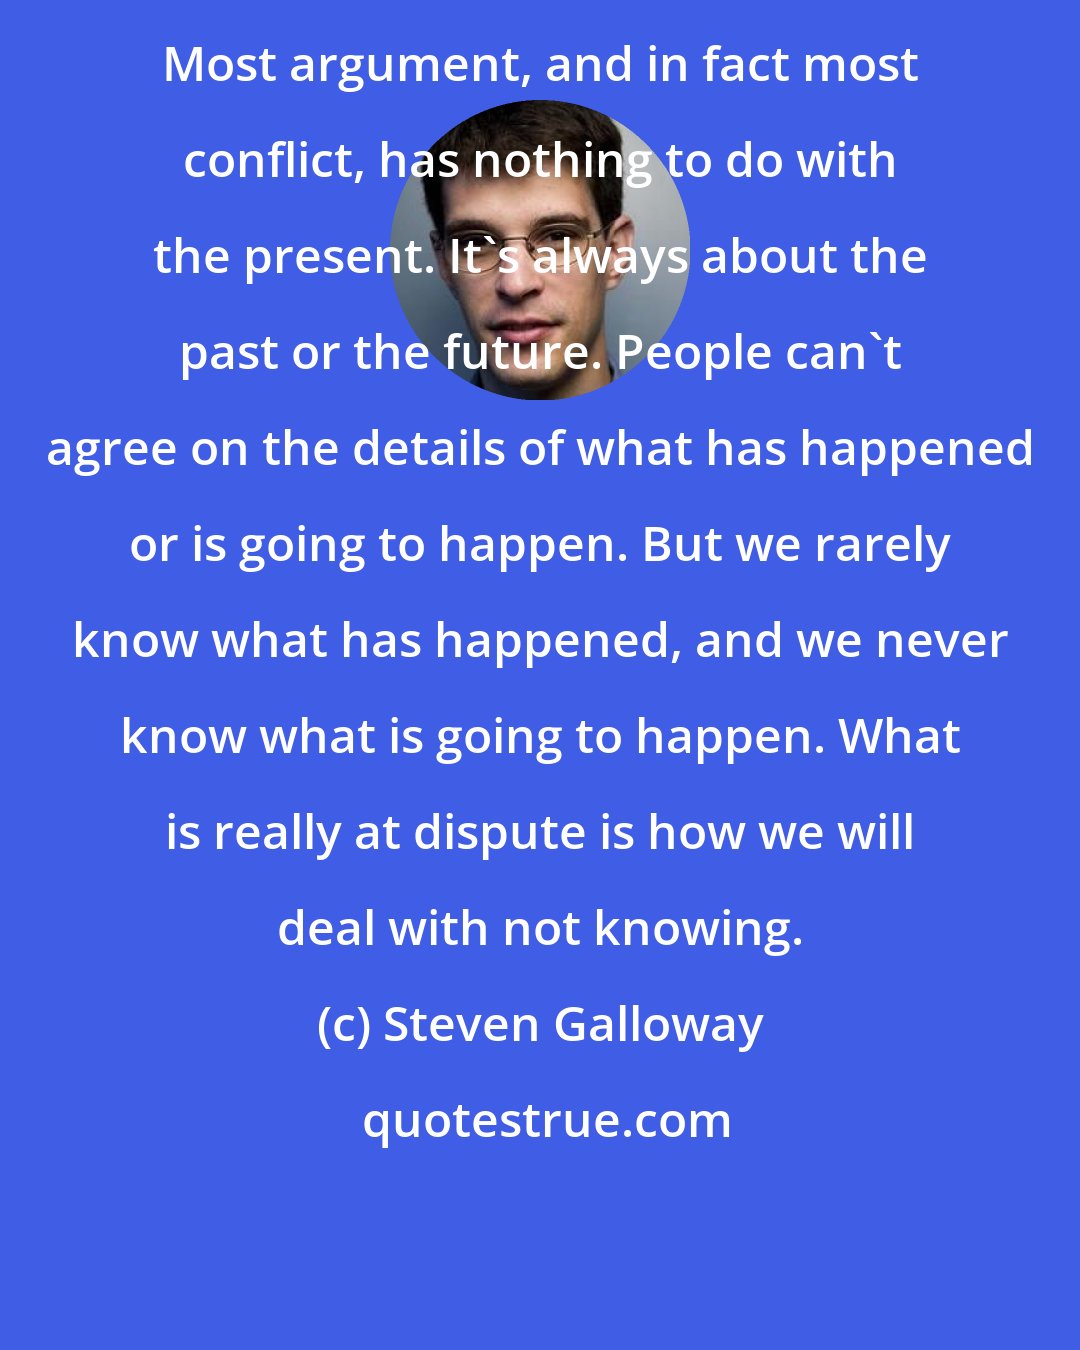 Steven Galloway: Most argument, and in fact most conflict, has nothing to do with the present. It's always about the past or the future. People can't agree on the details of what has happened or is going to happen. But we rarely know what has happened, and we never know what is going to happen. What is really at dispute is how we will deal with not knowing.